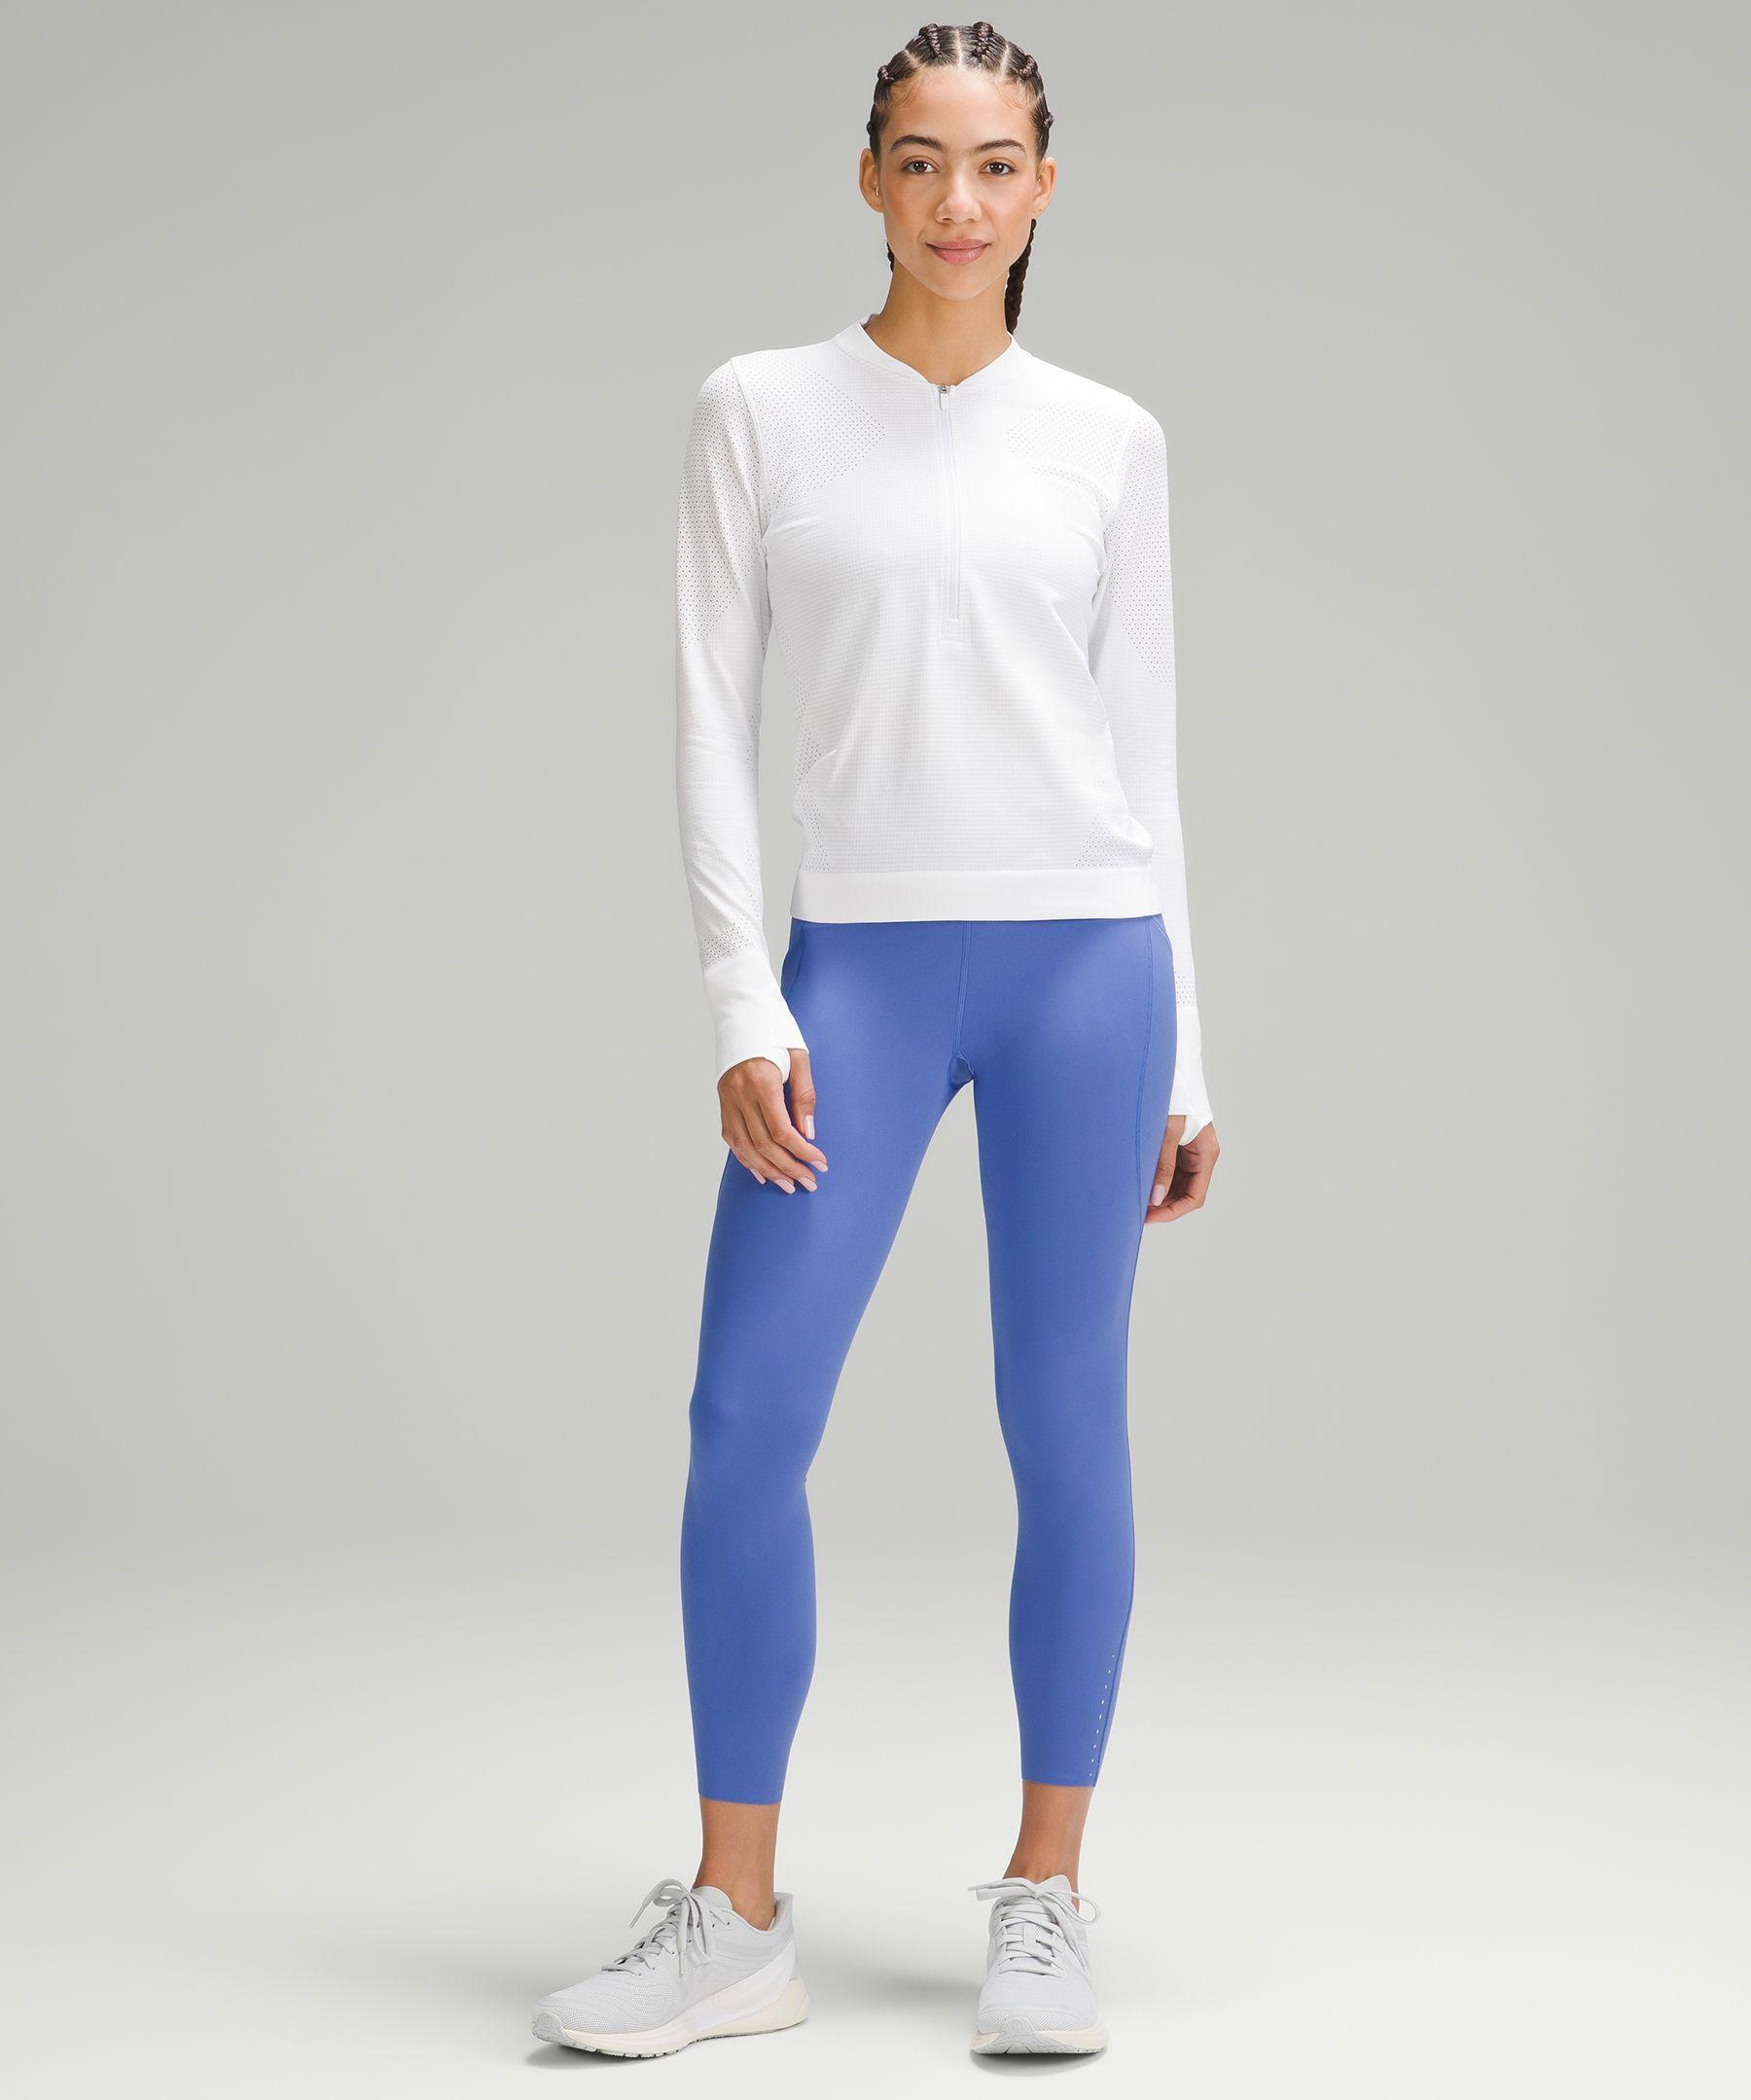 Lululemon athletica Fast and Free High-Rise Tight 25” Pockets